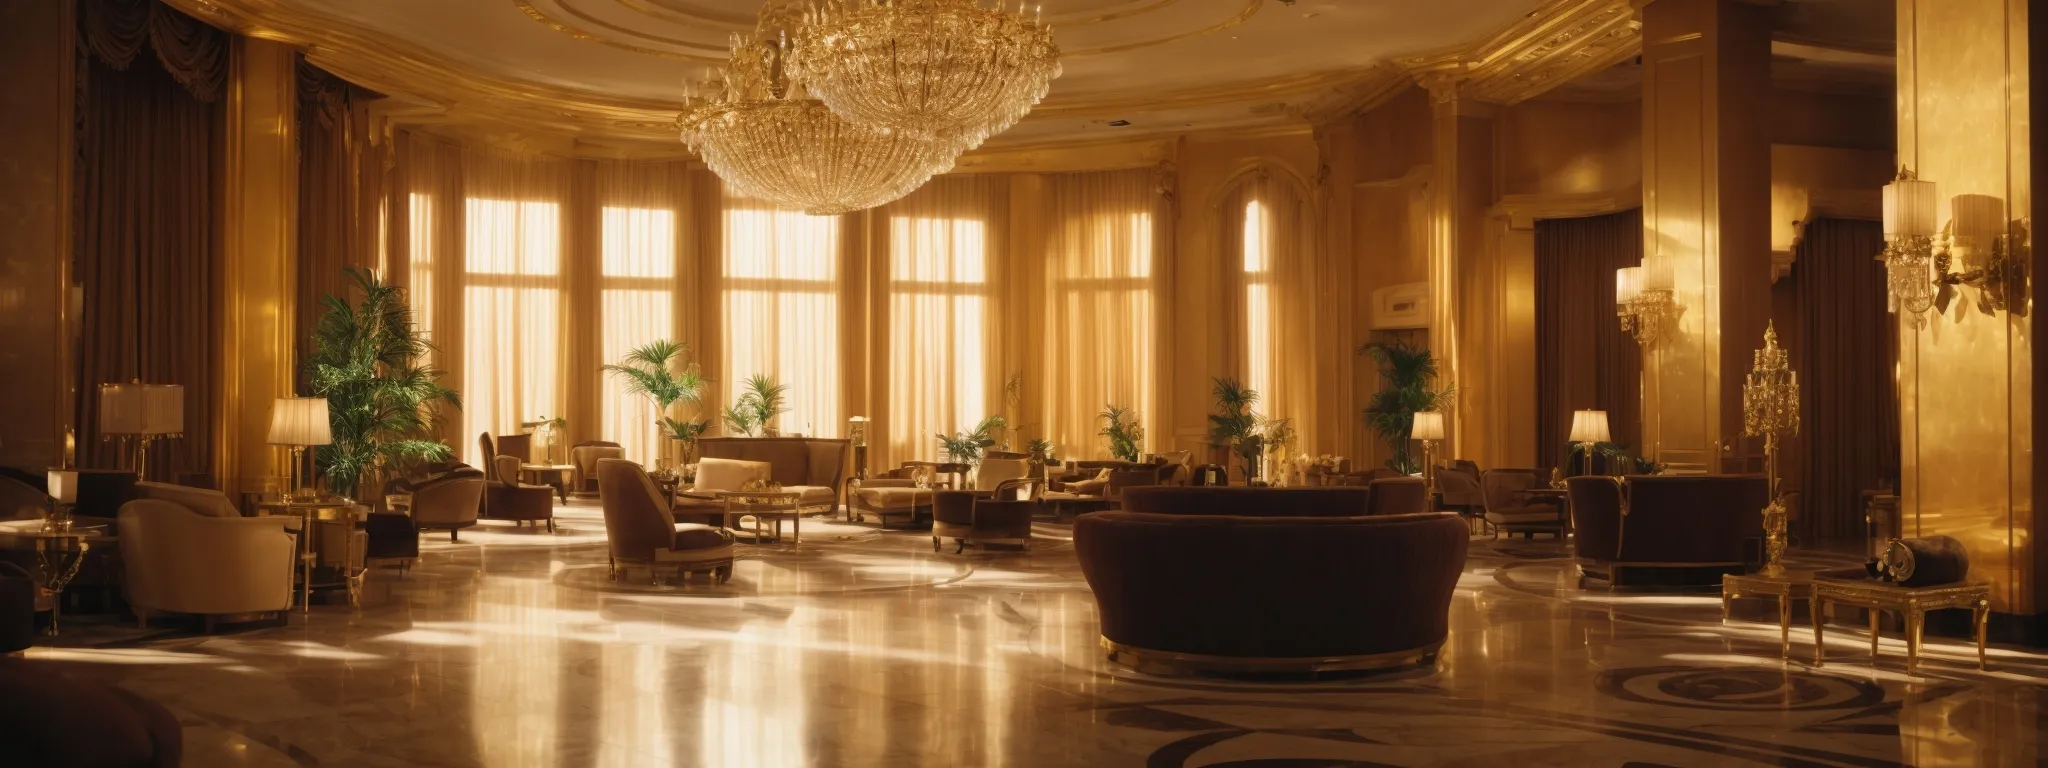 an opulent hotel lobby bathed in golden light, inviting prospective guests with its luxurious ambiance.